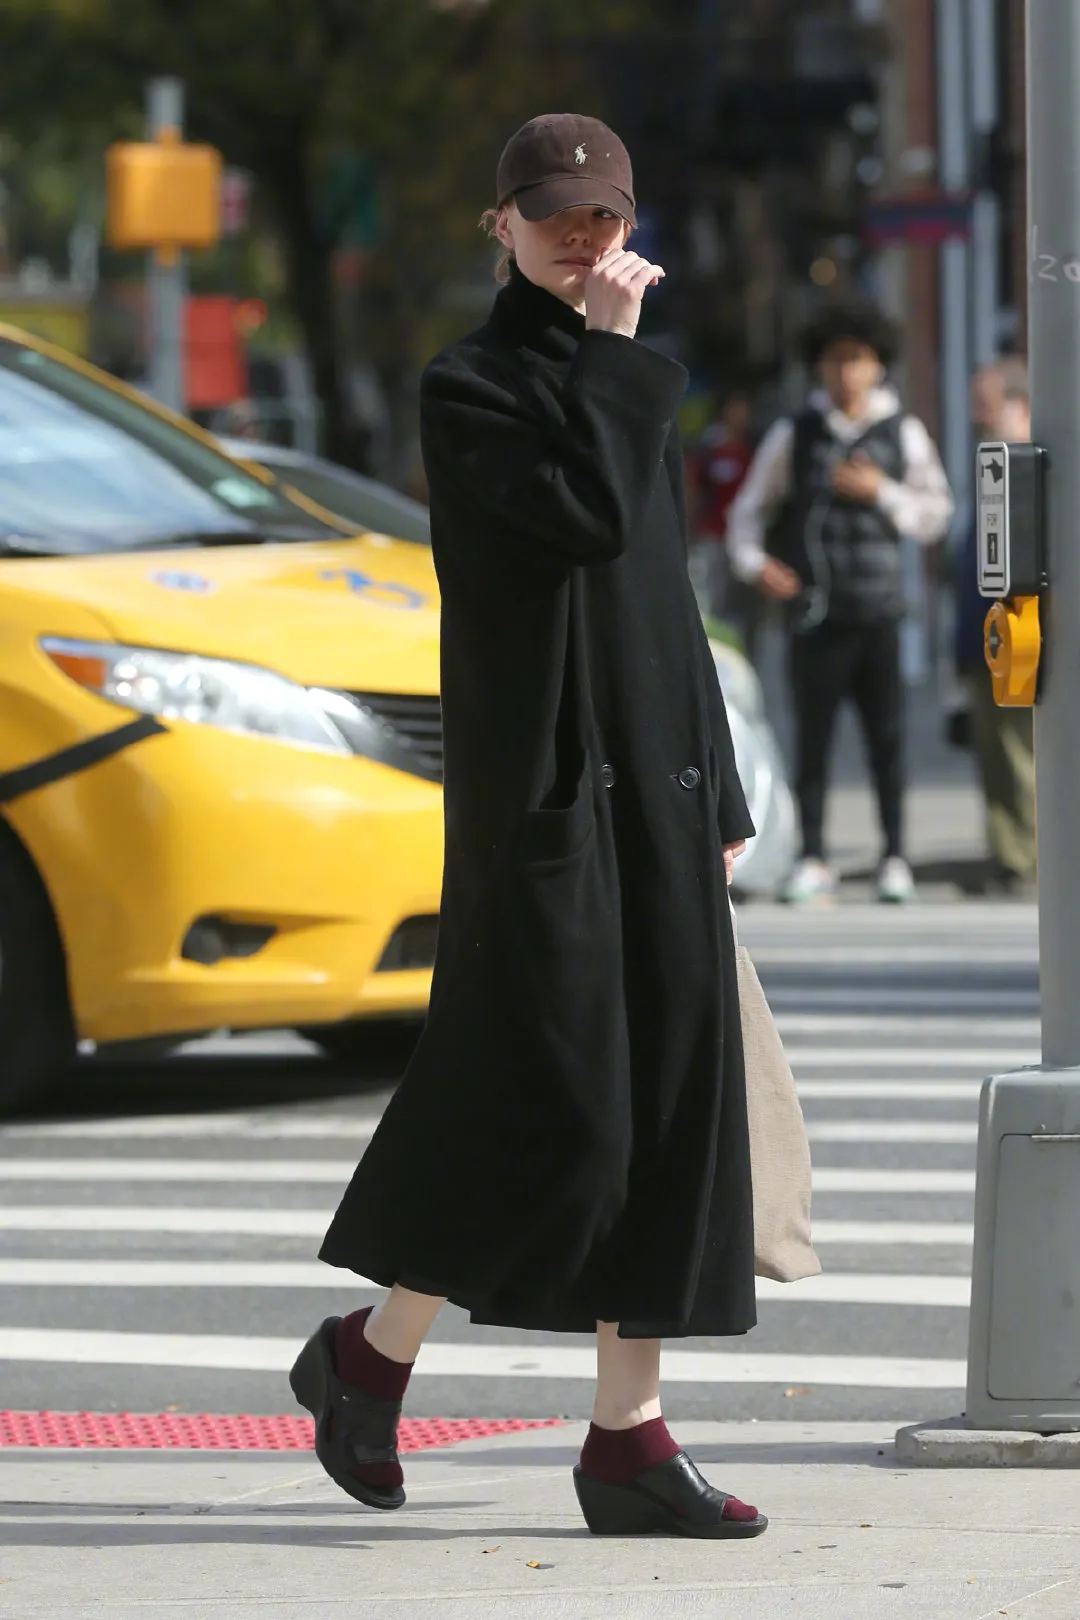 Photos of Emma Stone going out in New York recently | FMV6